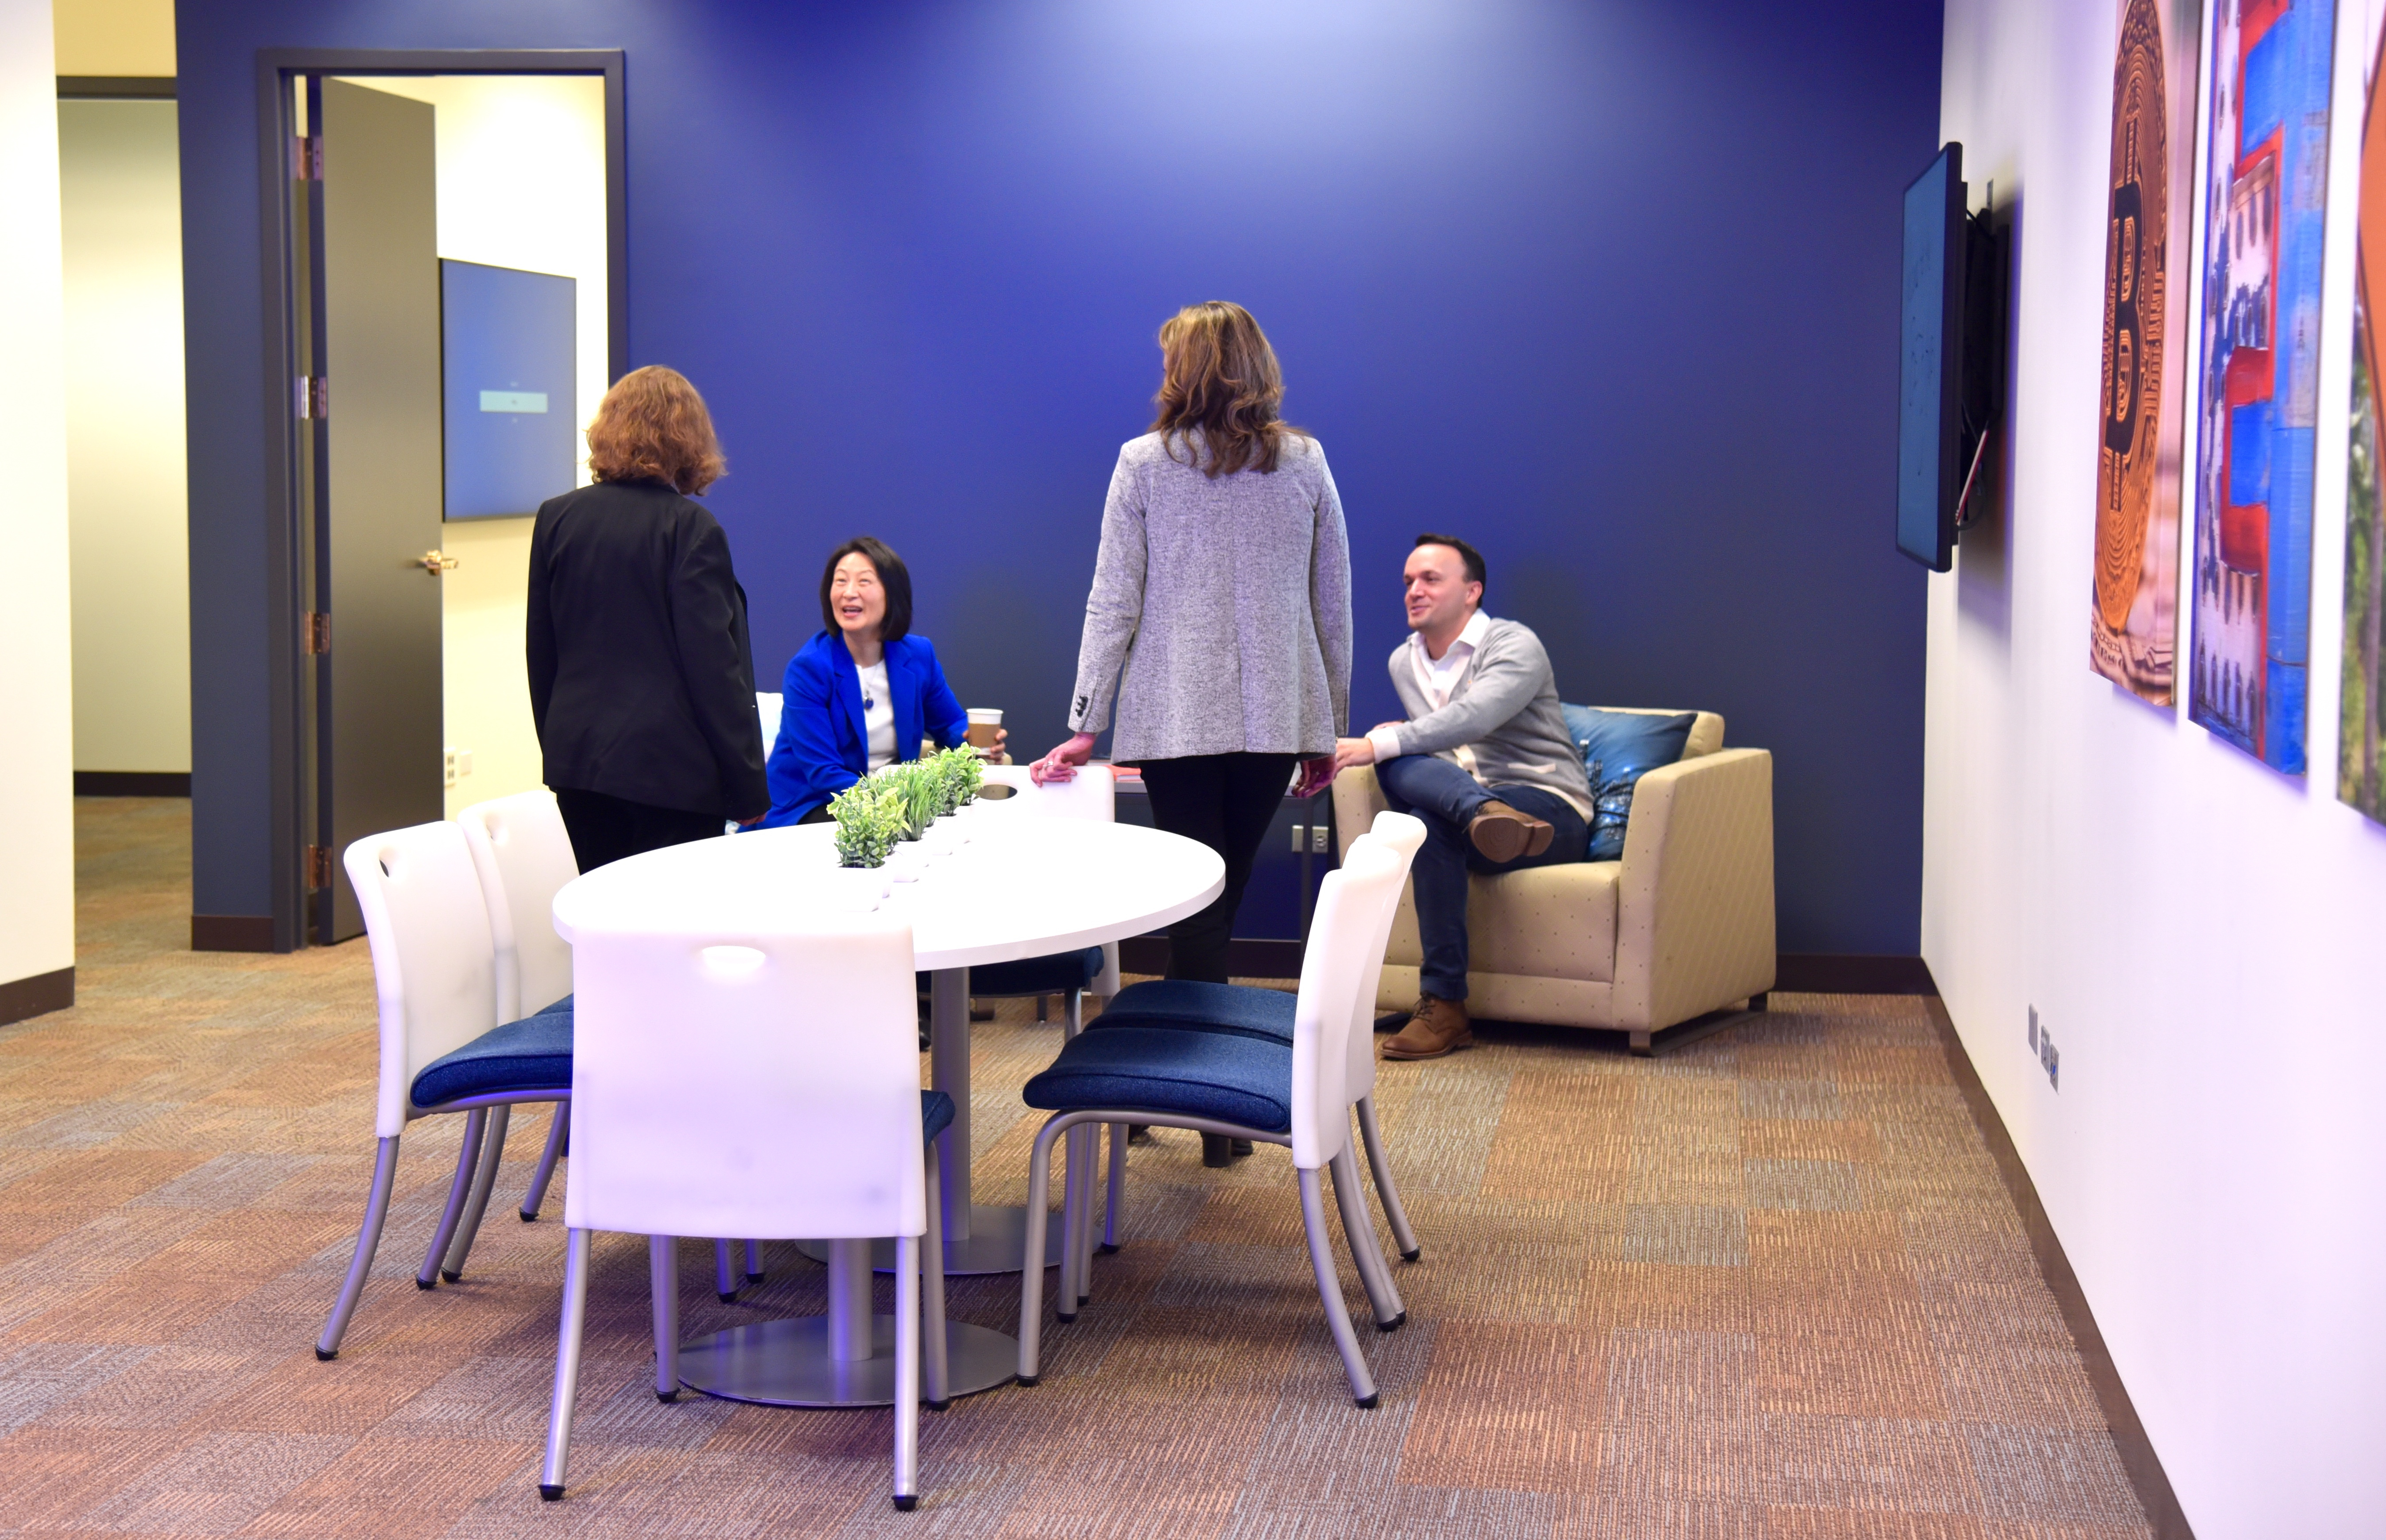 A group of faculty gathers in a collaborative space